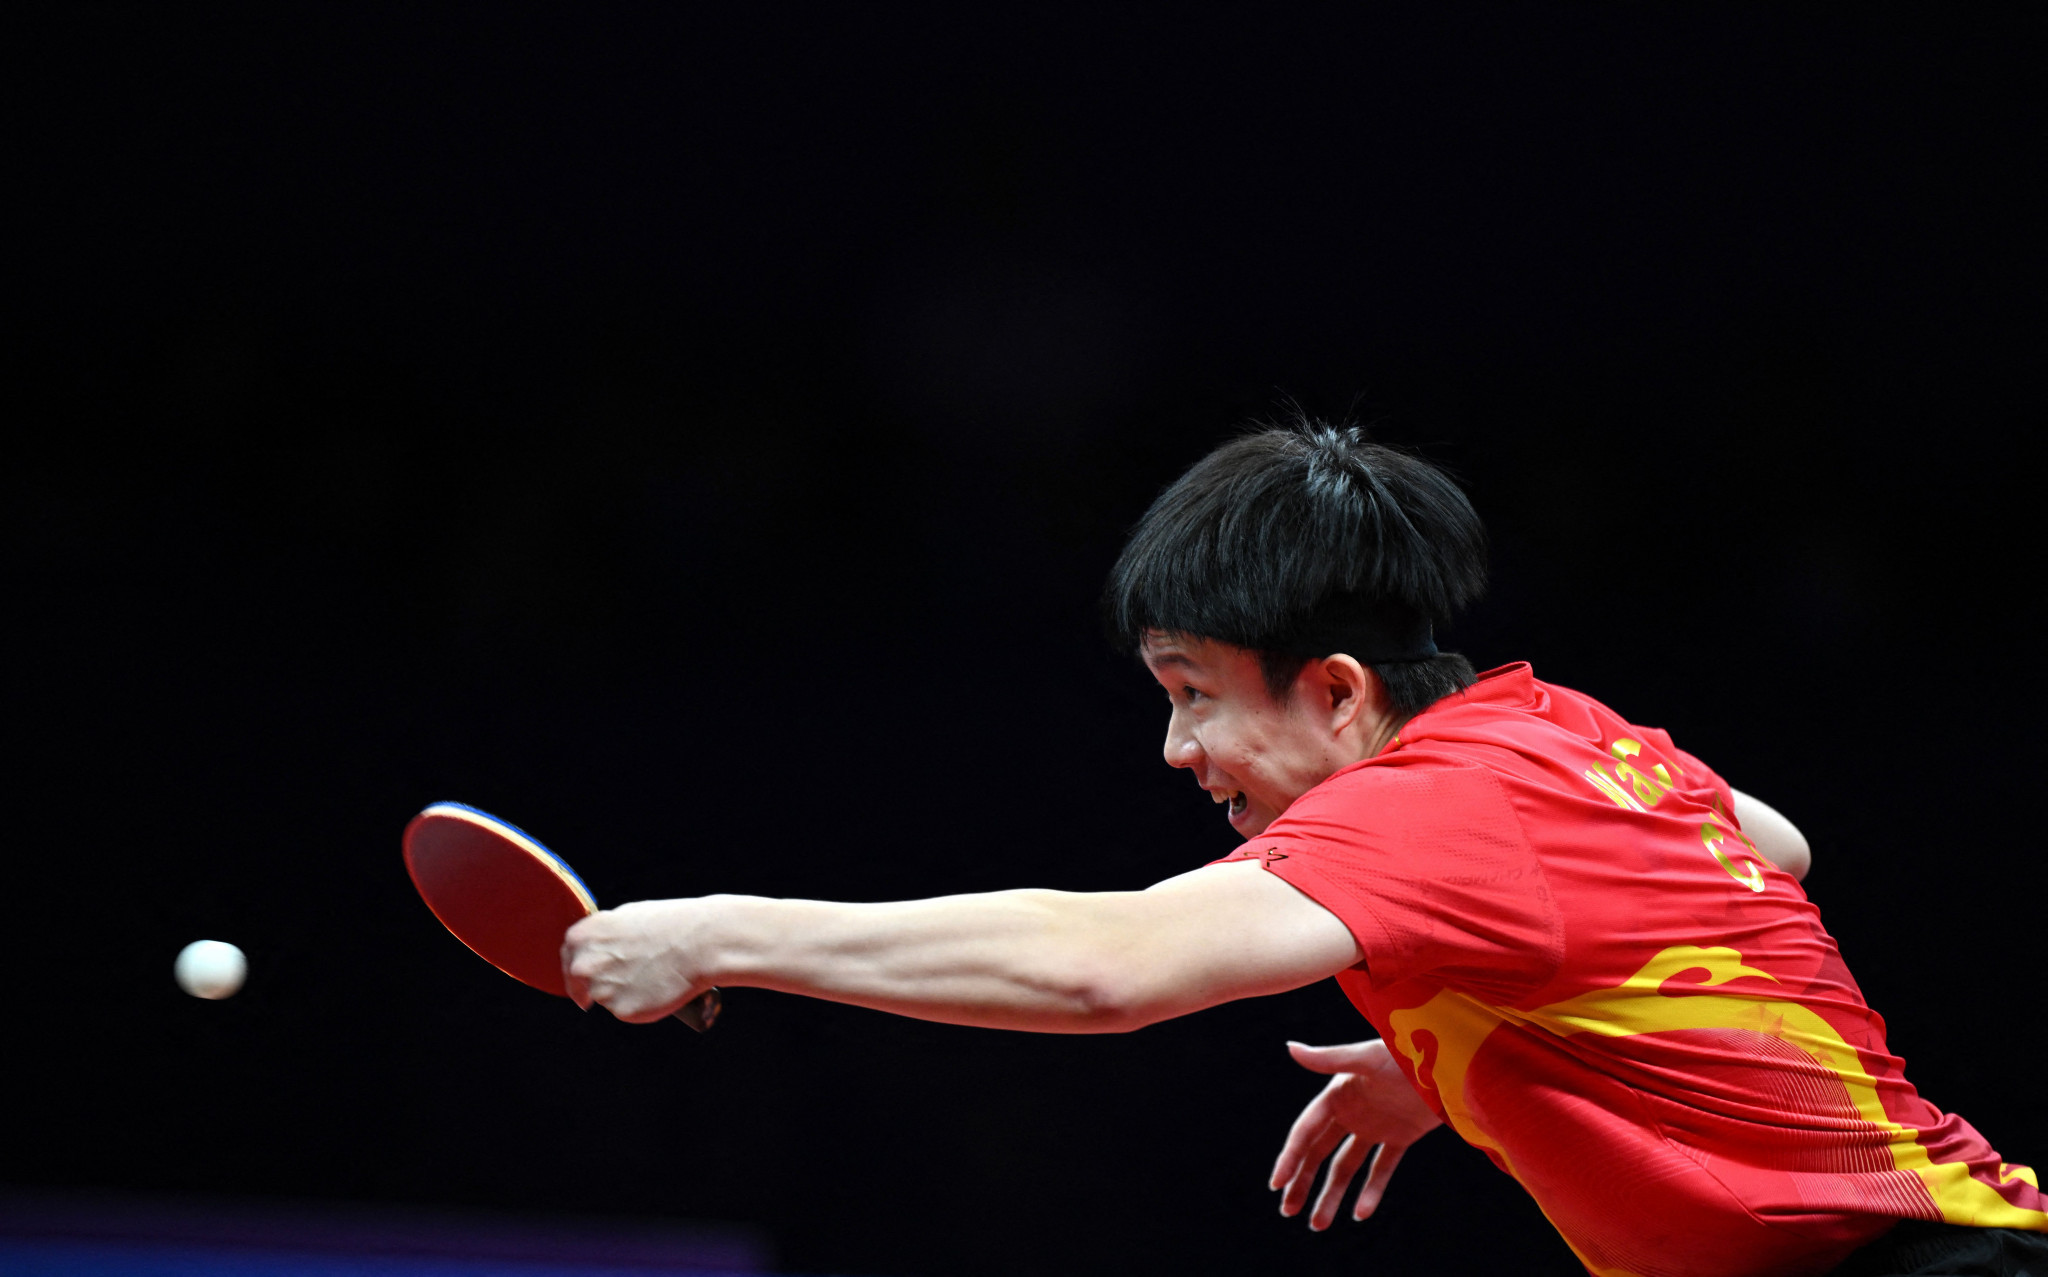 The all-China showdown saw Wang take the 4-3 victory which was revenge for the World Championships defeat inflicted by Fan earlier this year ©Getty Images